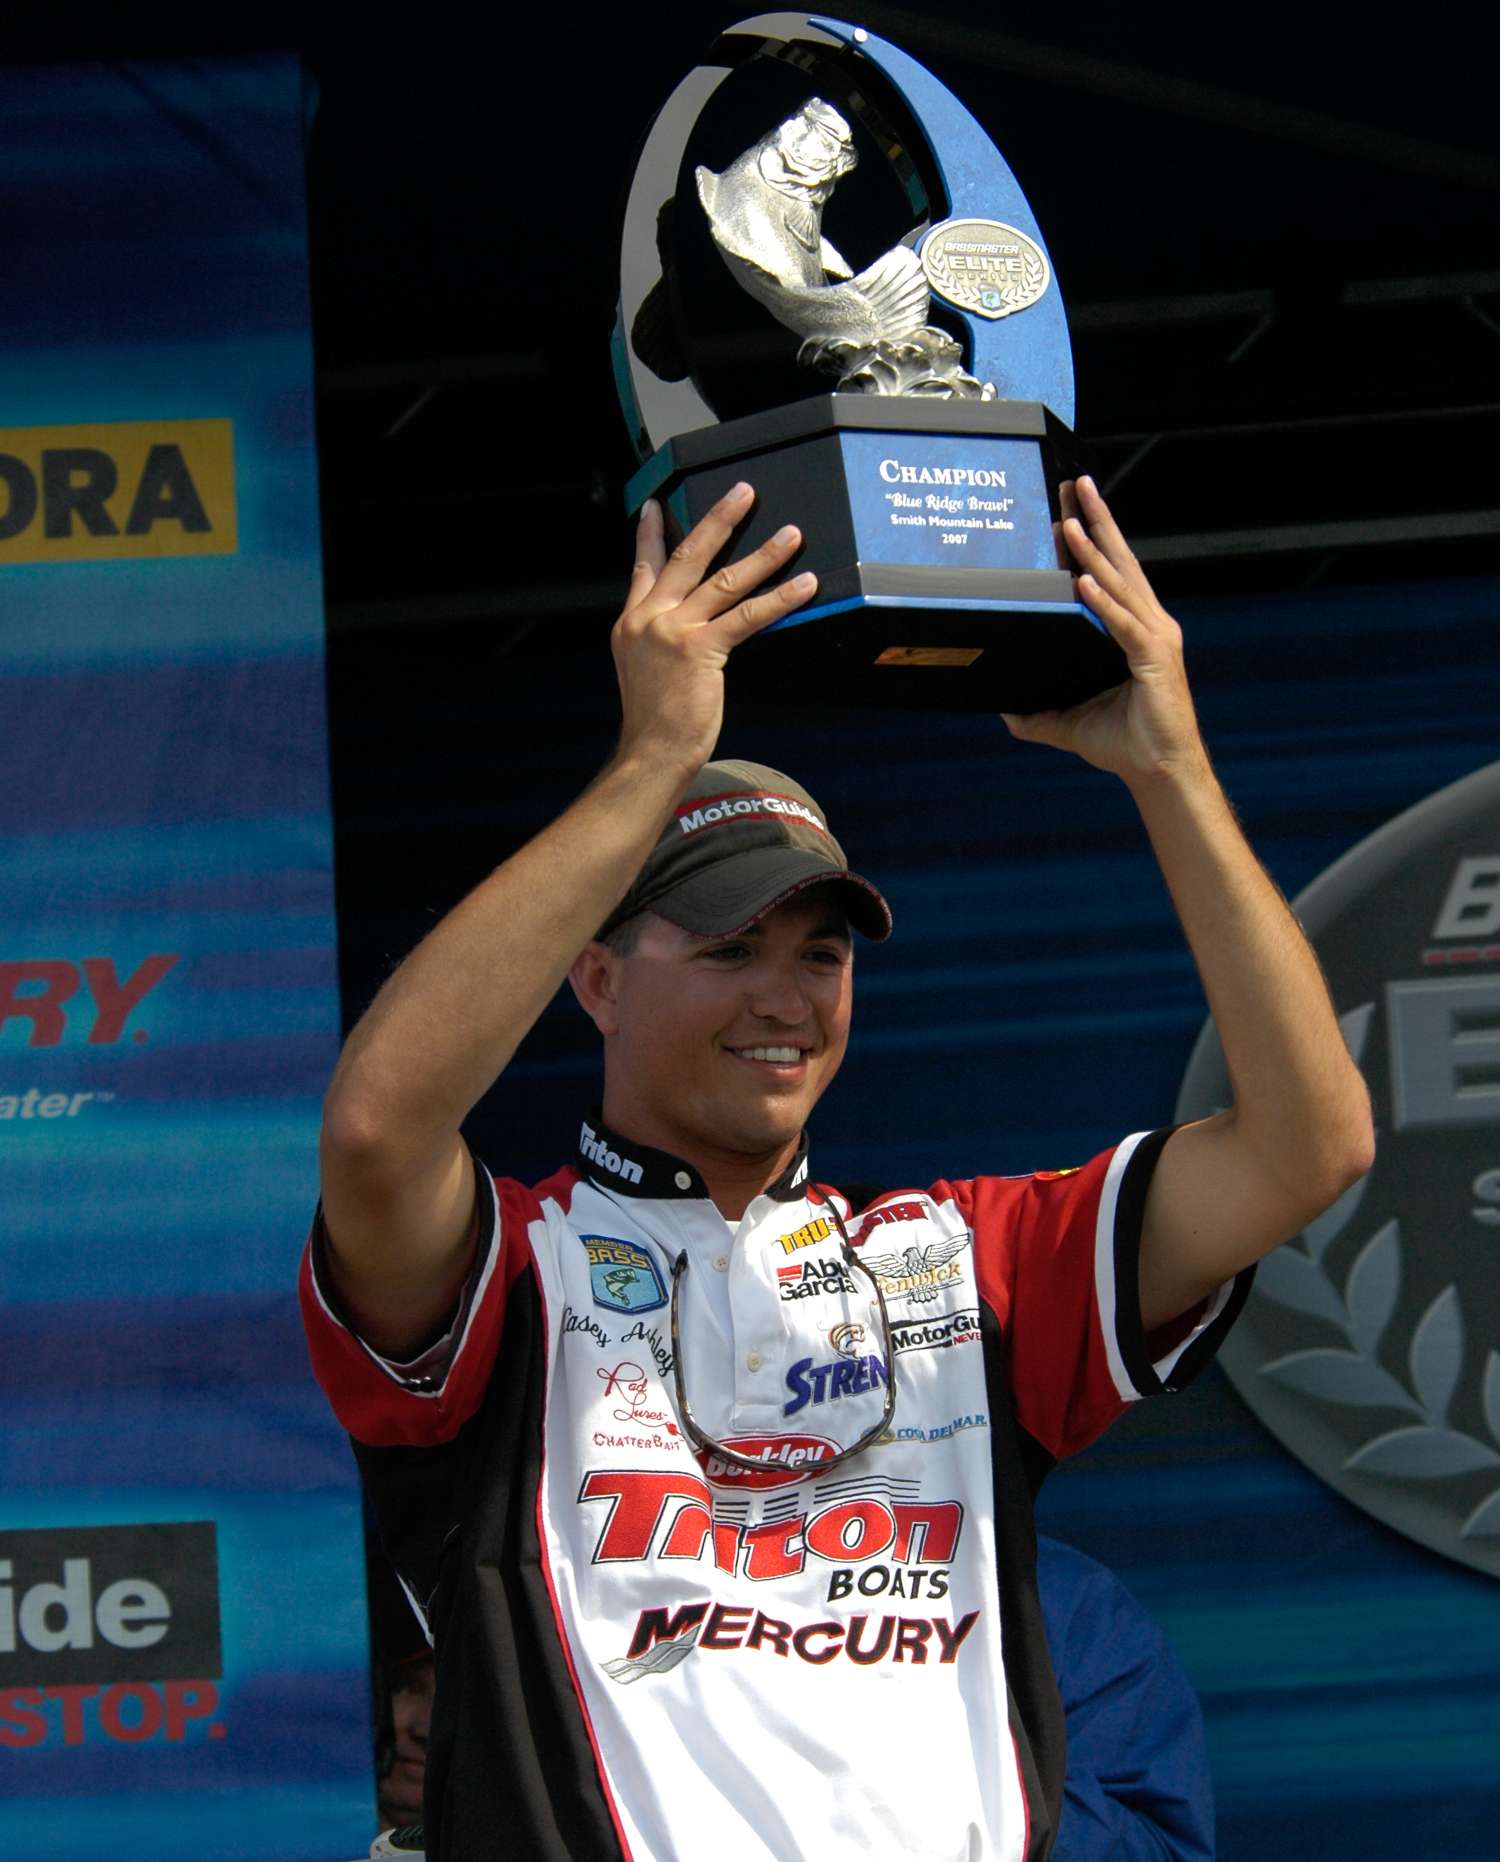 Youngest Elite Series Winner: Casey Ashley, 23
Casey Ashley was in his rookie year on the Bassmaster Elite Series when he won his first B.A.S.S. event, and he was still wet behind the ears when he did it. He was only 23 when he hoisted the trophy at Virginia's Smith Mountain Lake in 2007. He's since won two more.